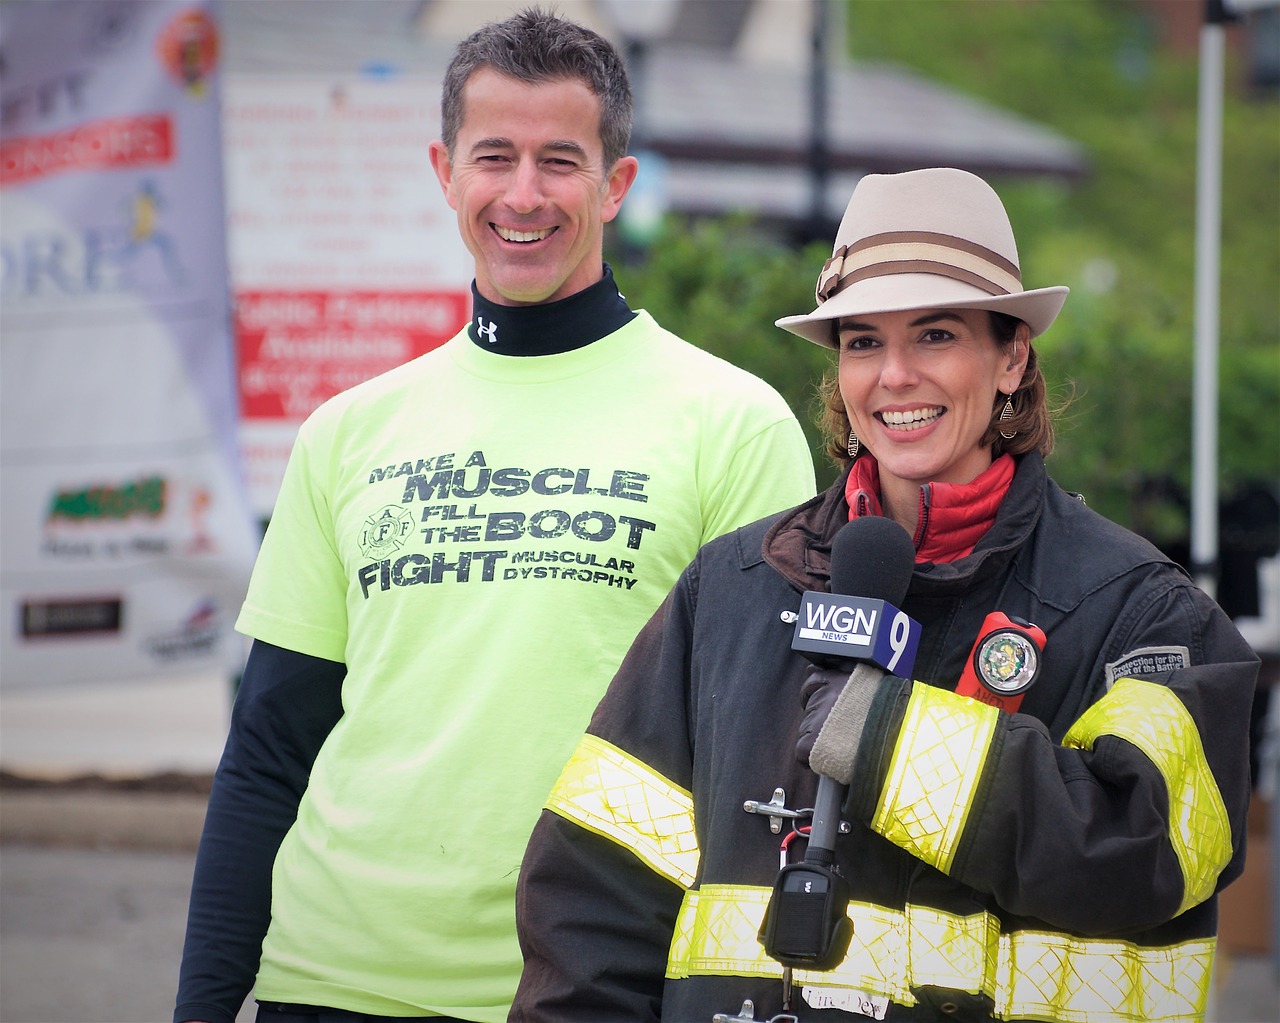 television reporter fireman event free photo